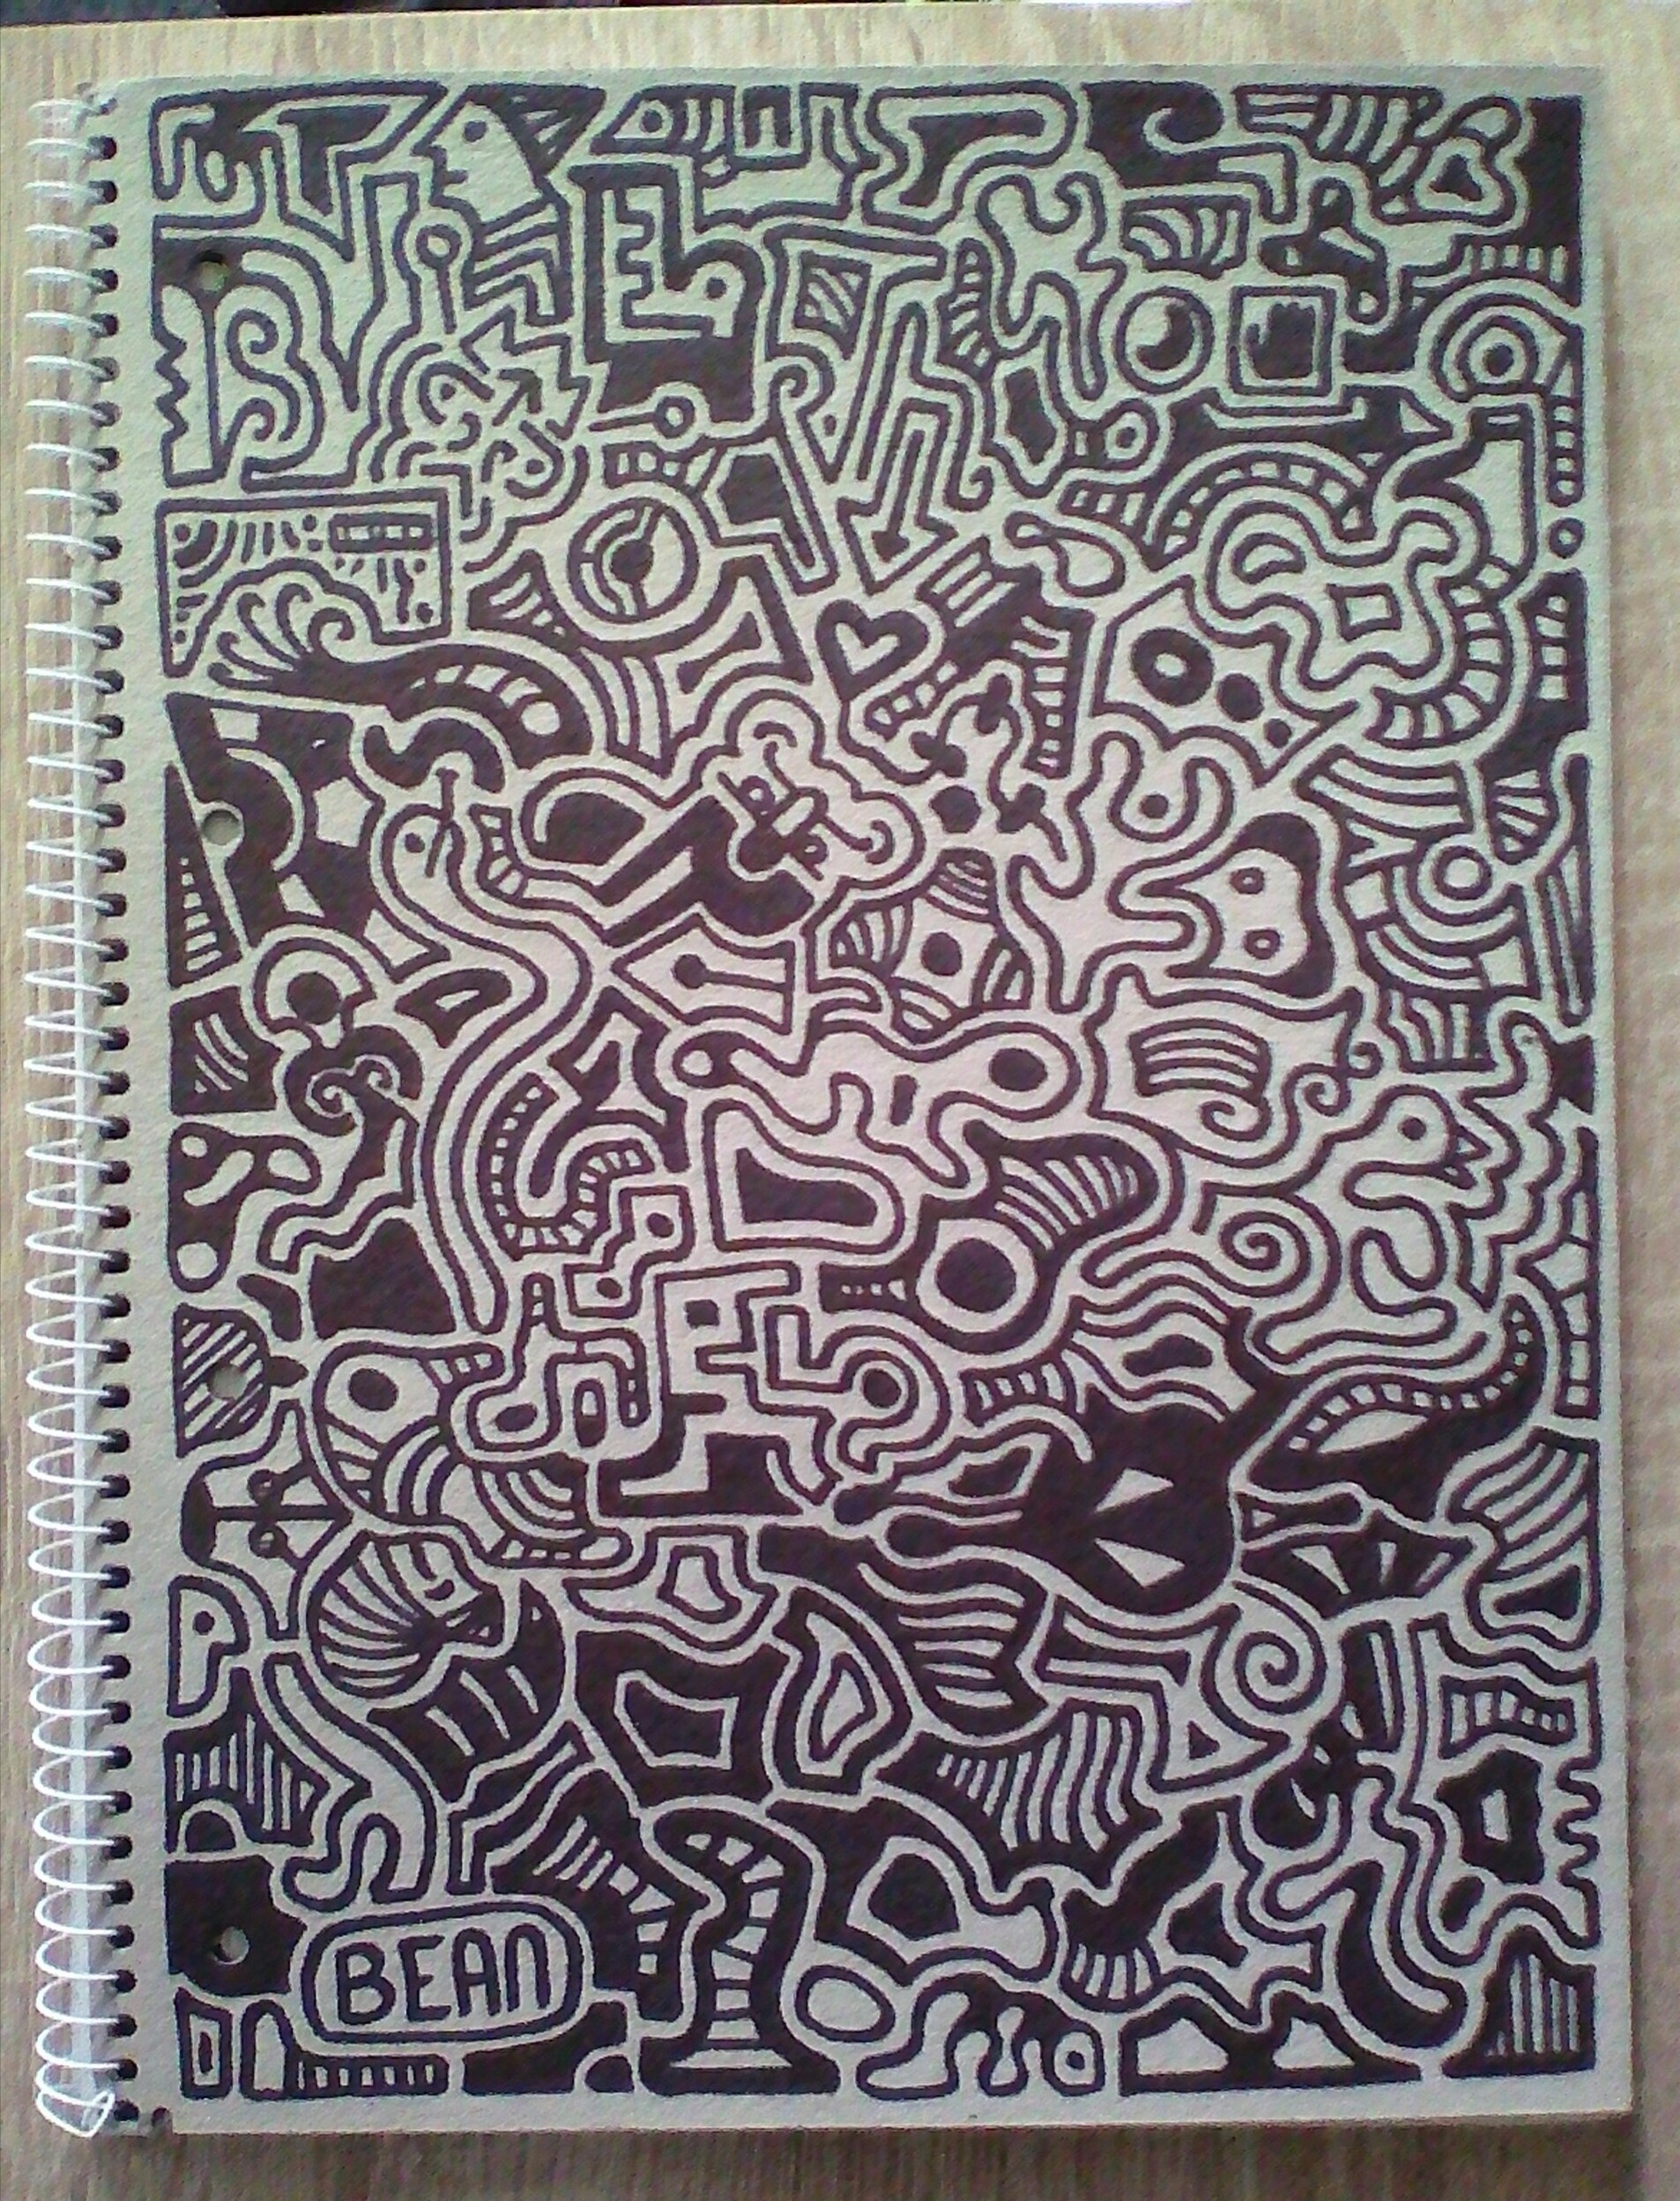 back cardboard cover of a ringbook covered with abstract doodles